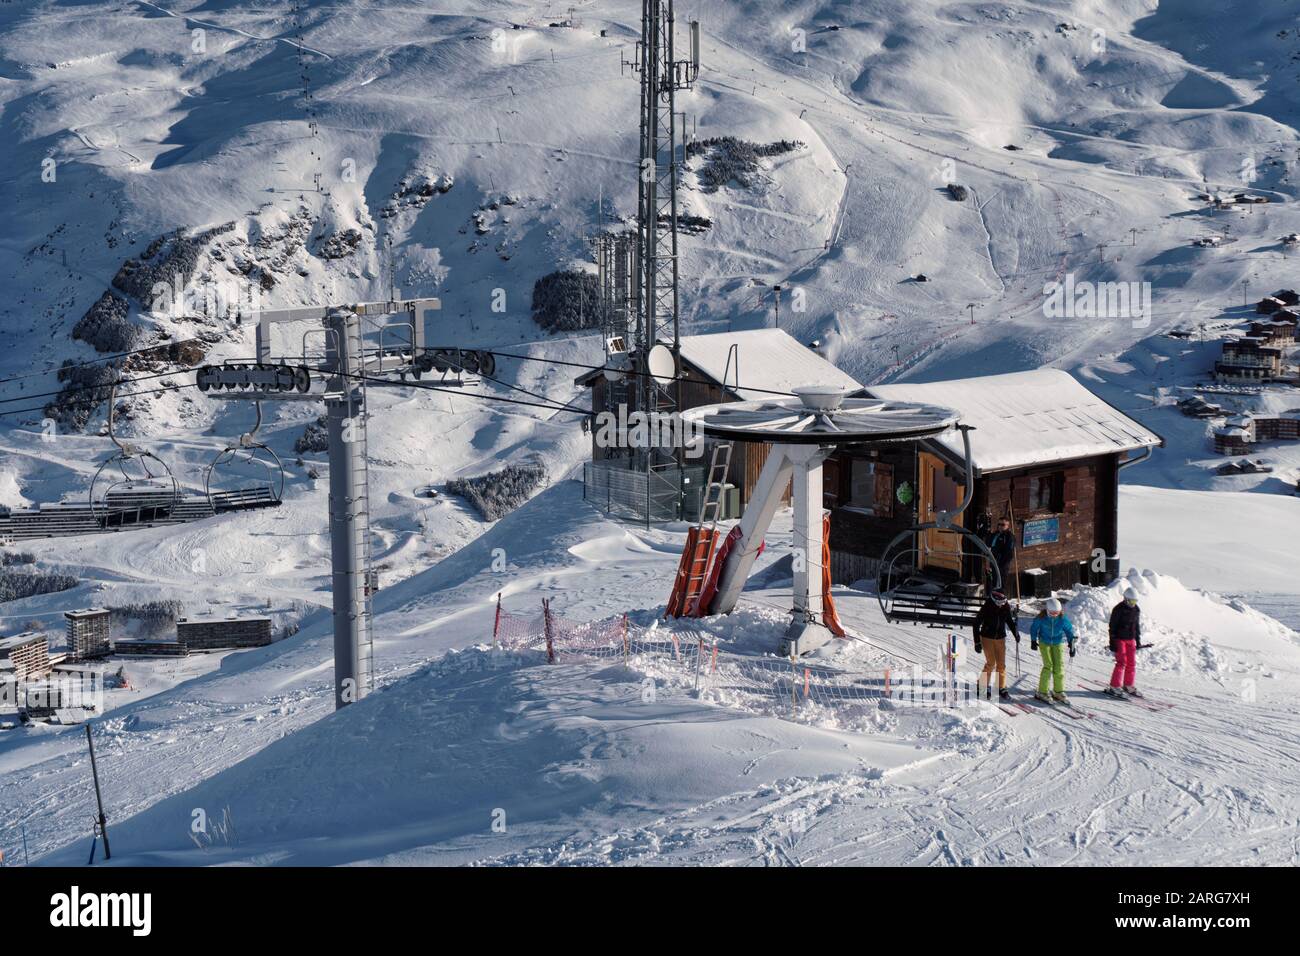 3 skiers get off the Rocher Noir chair lift on La Masse in the French ski resort of Les Menuires. Stock Photo